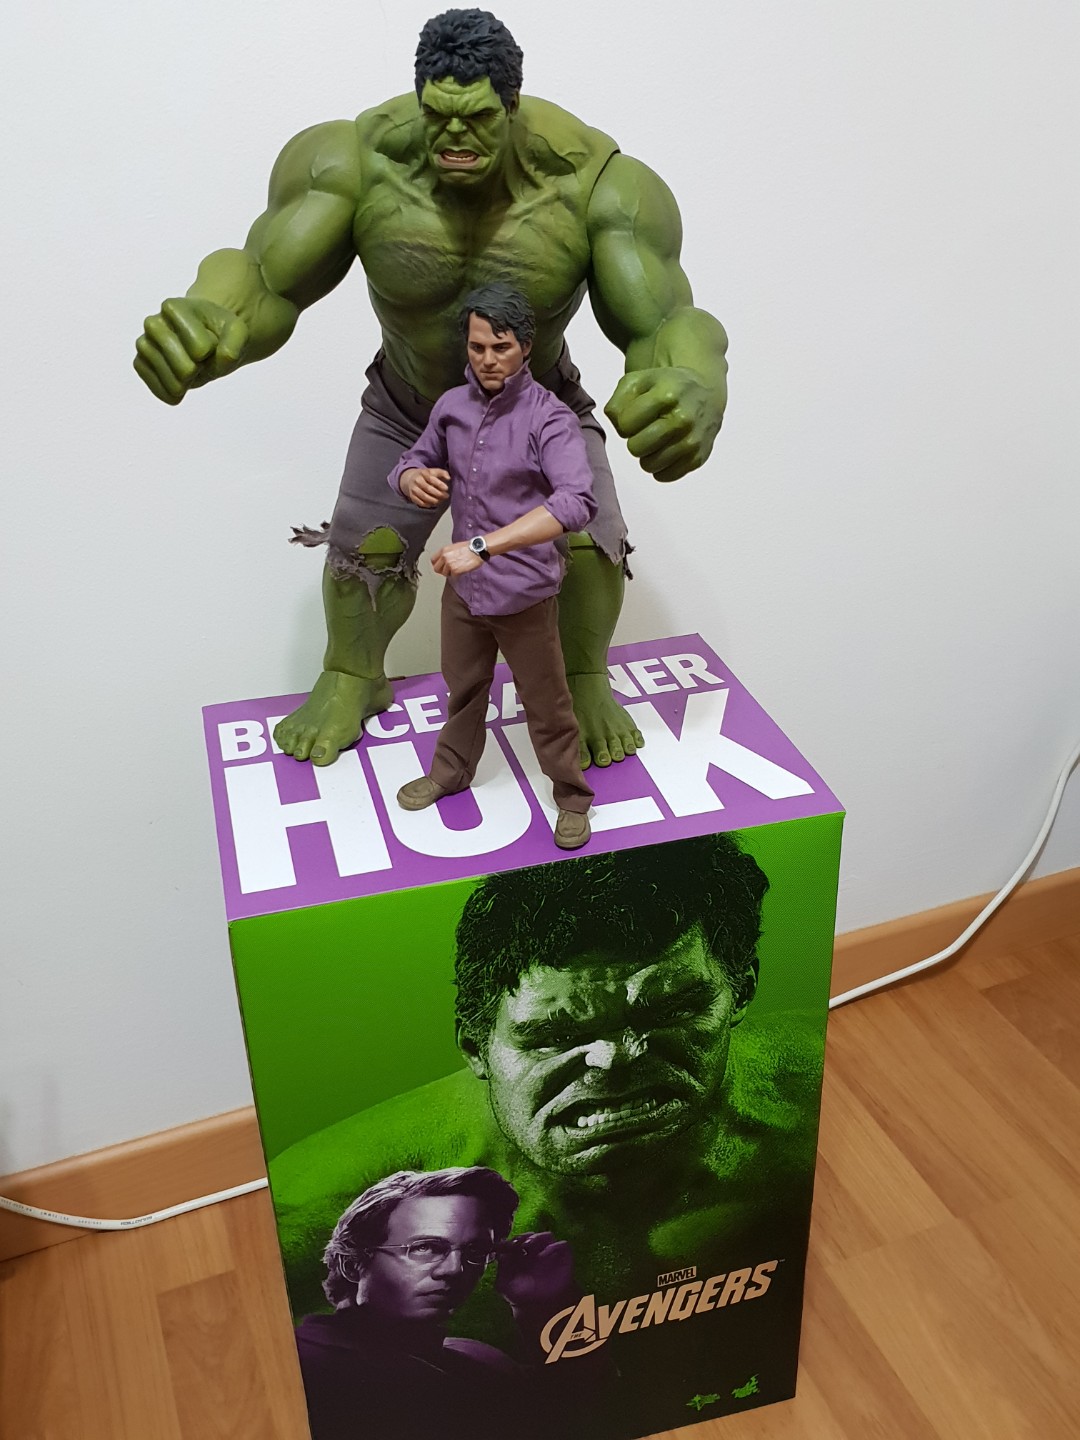 hot toys bruce banner and hulk